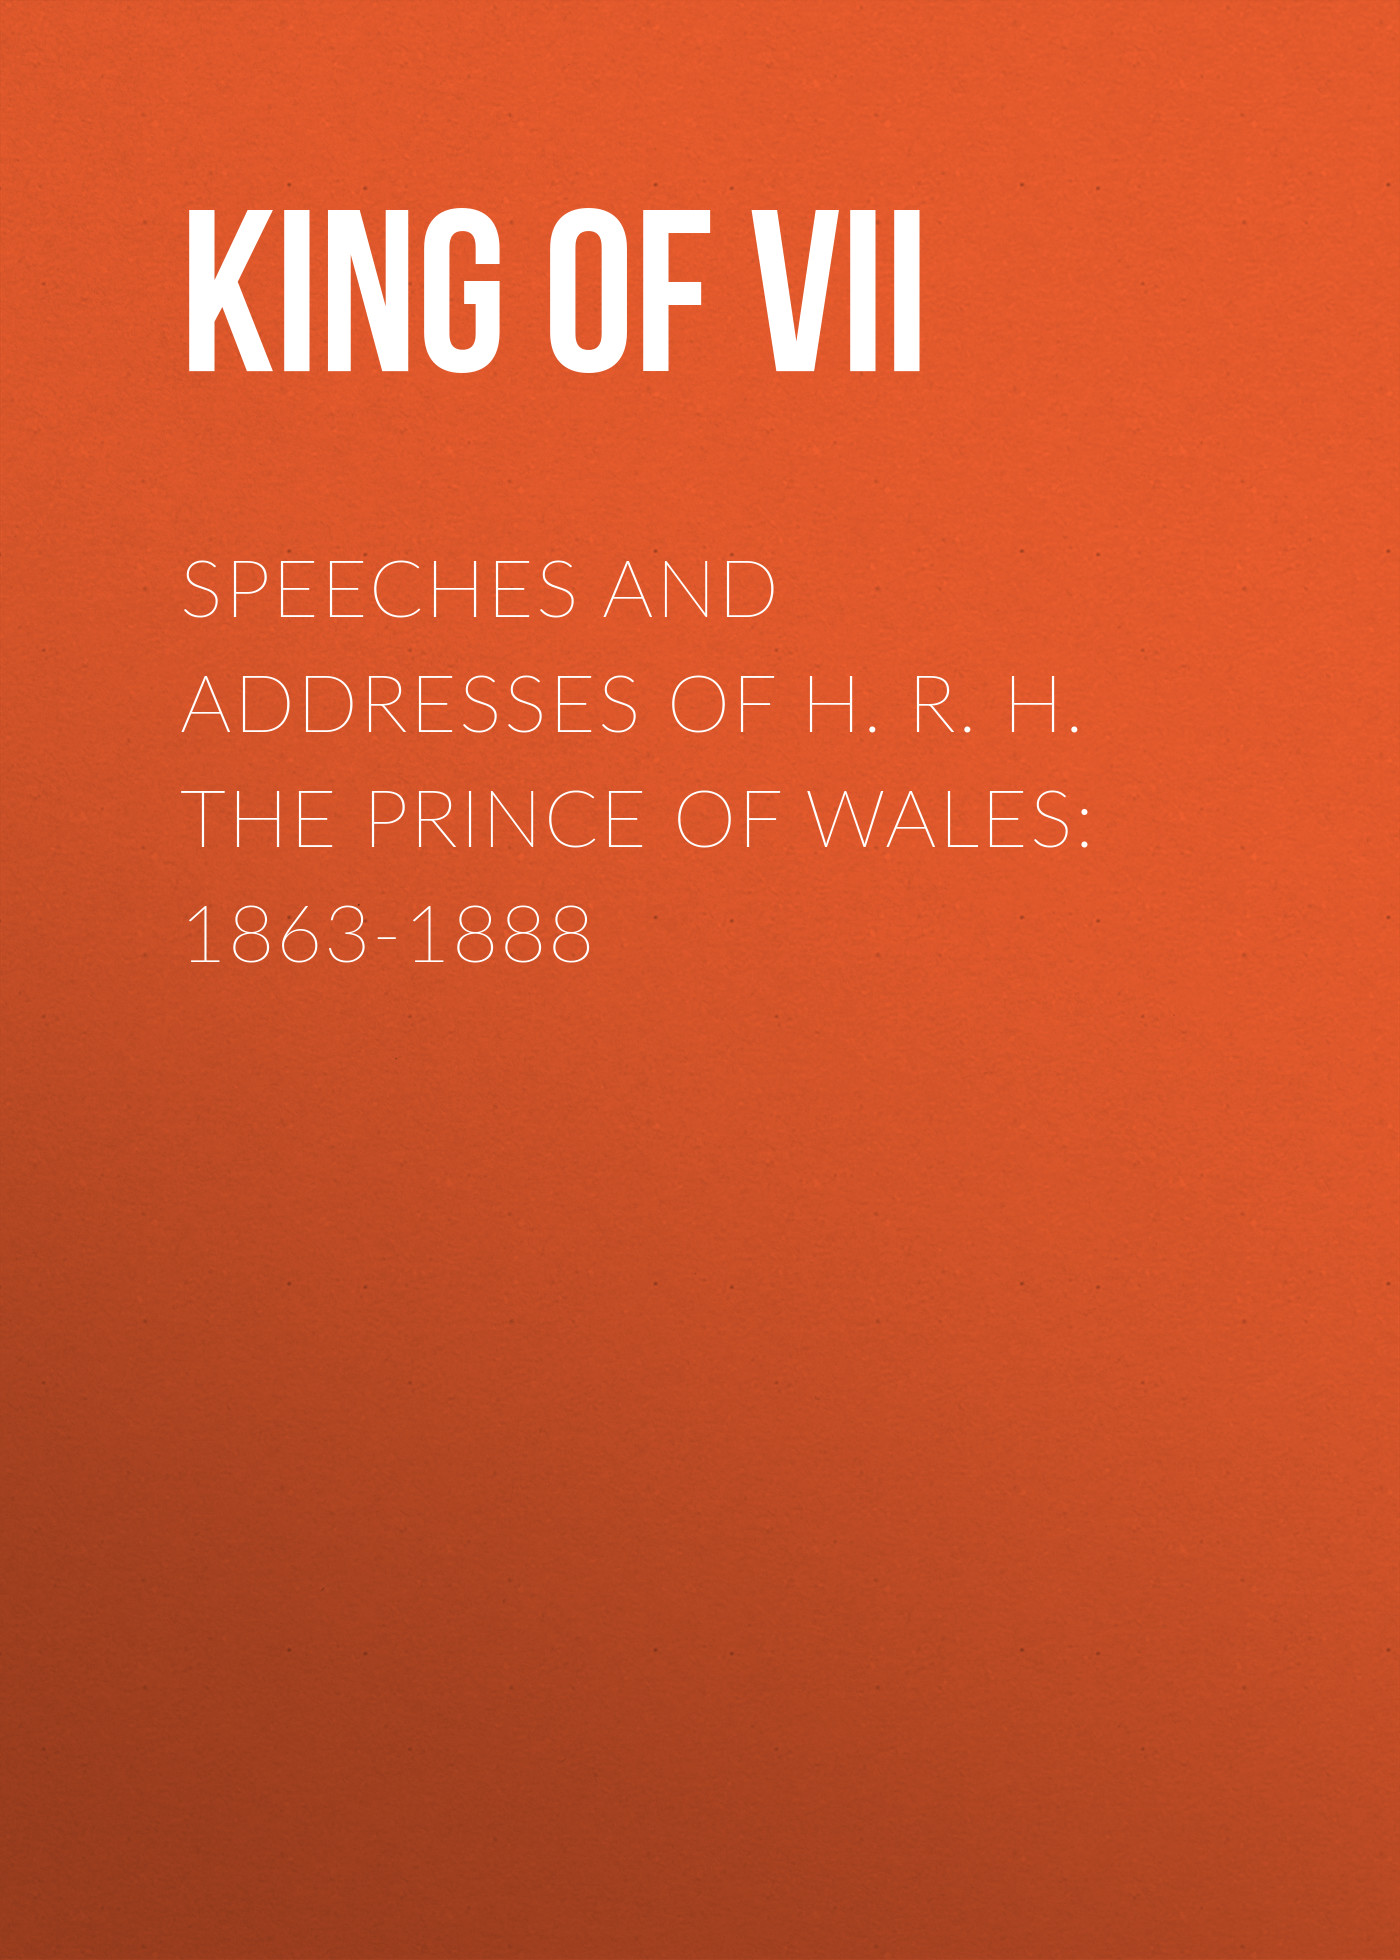 King of Great Britain Edward VII Speeches and Addresses of H. R. H. the Prince of Wales: 1863-1888